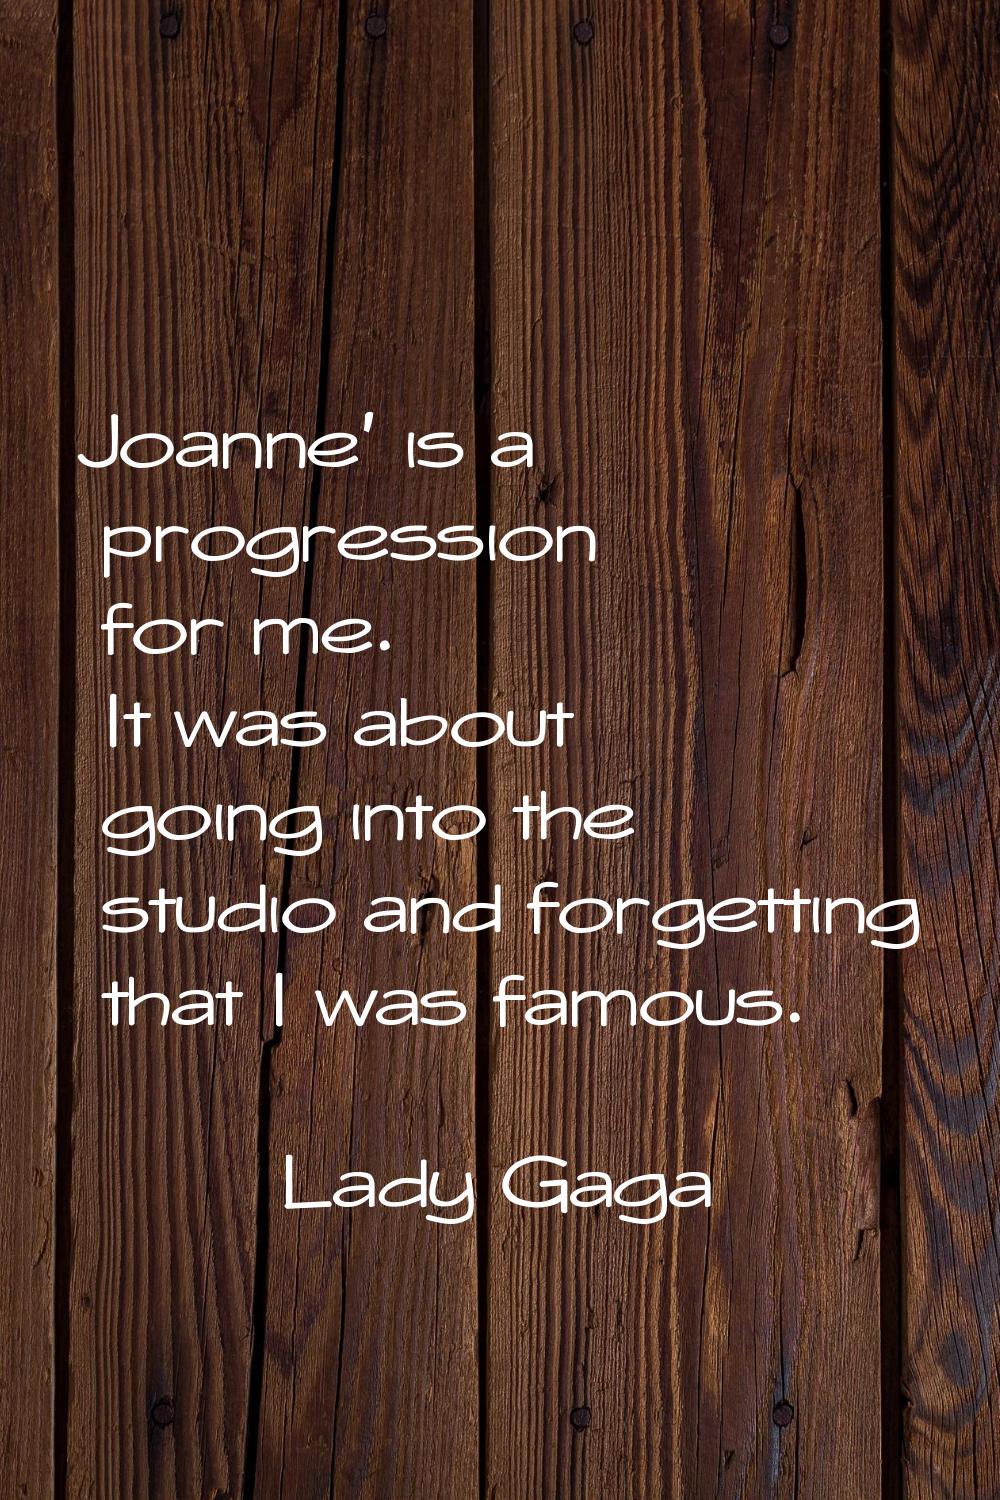 Joanne' is a progression for me. It was about going into the studio and forgetting that I was famou